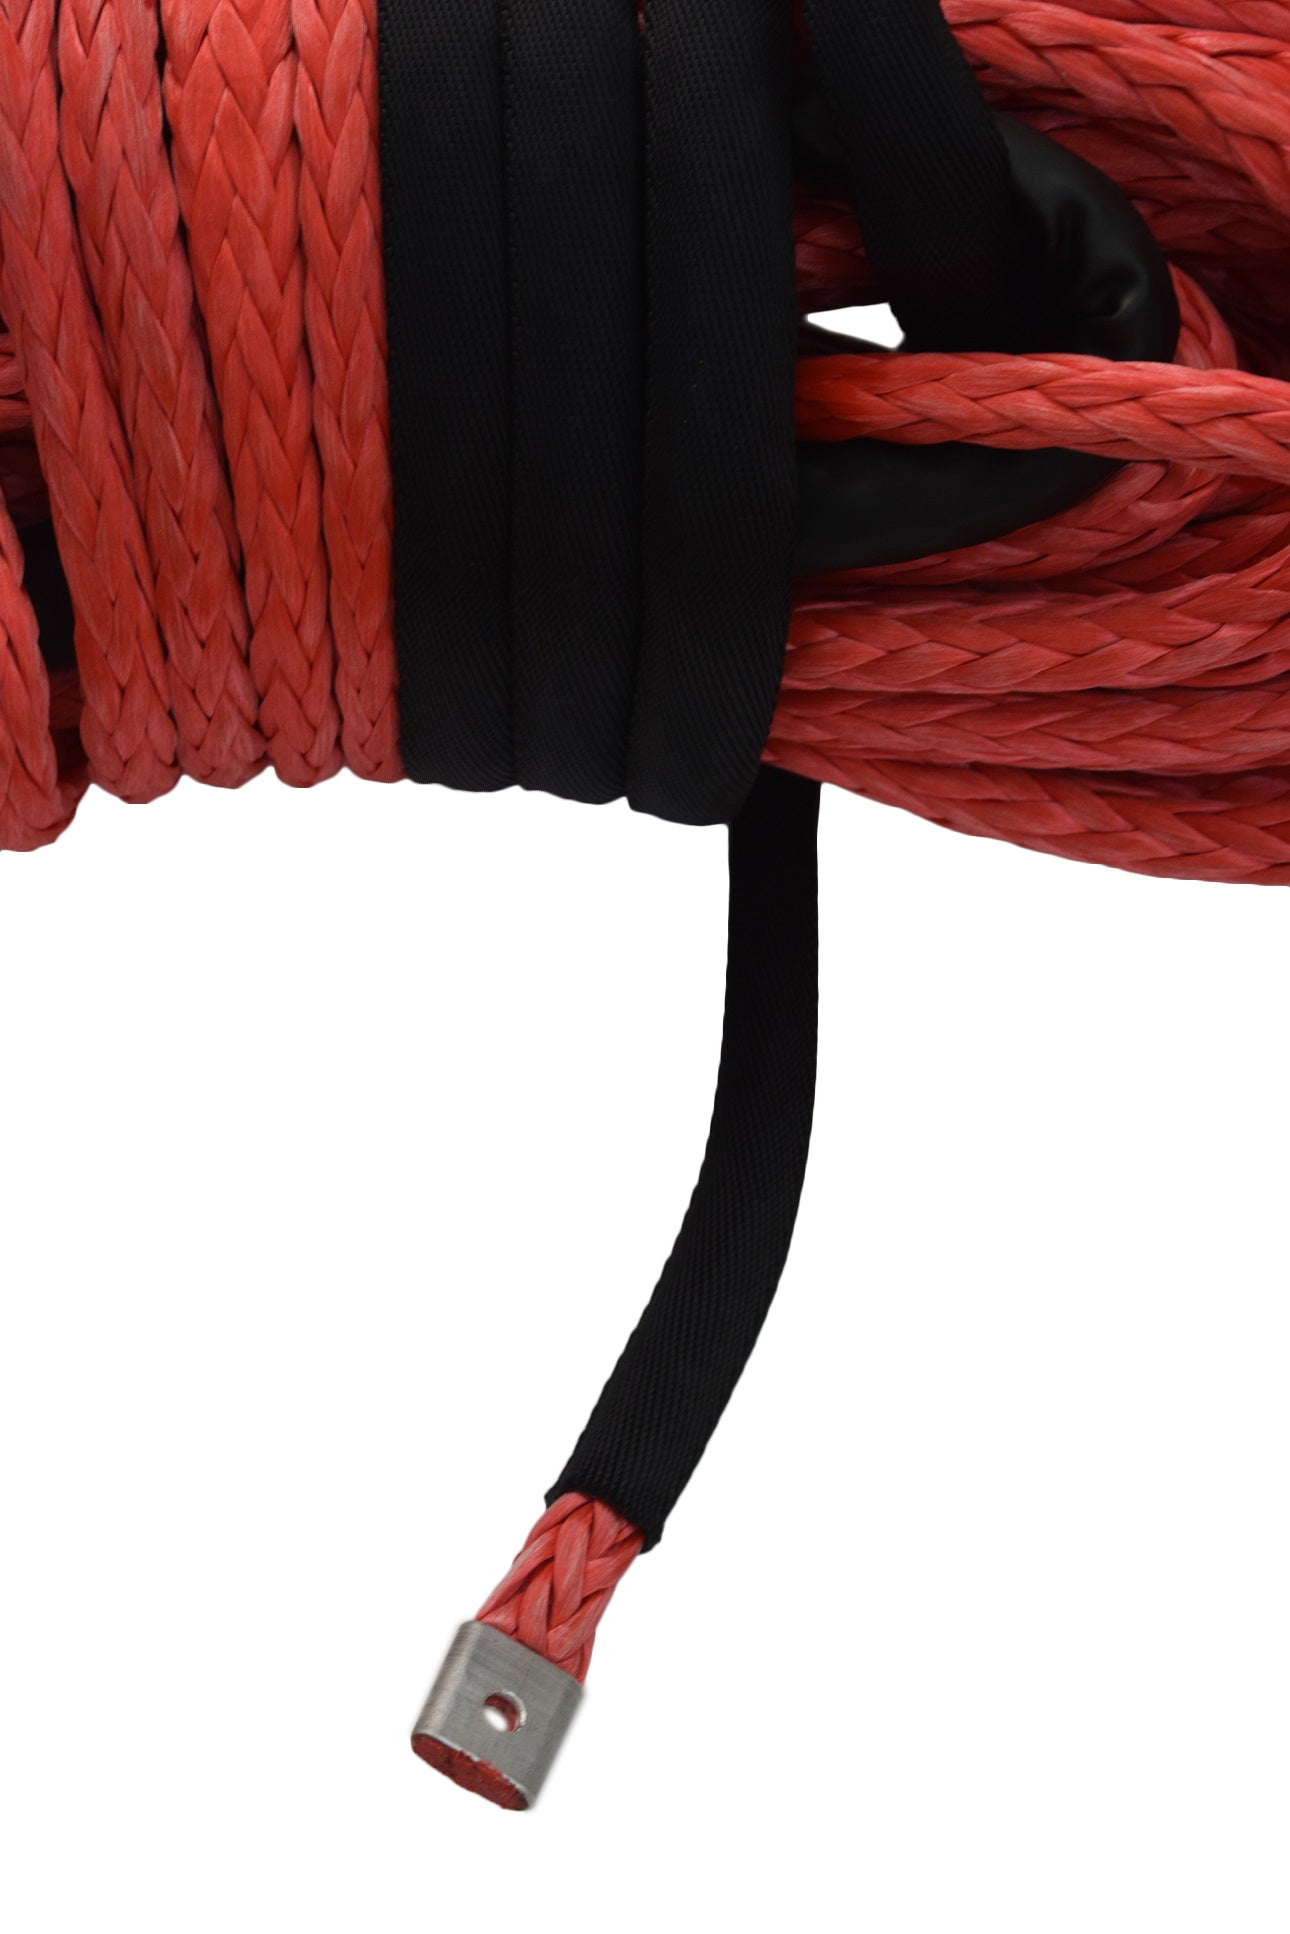 14mm*45m Red Synthetic Winch Rope with Hook,ATV Winch Cable, Offroad R –  TOPTOP OUTDOOR